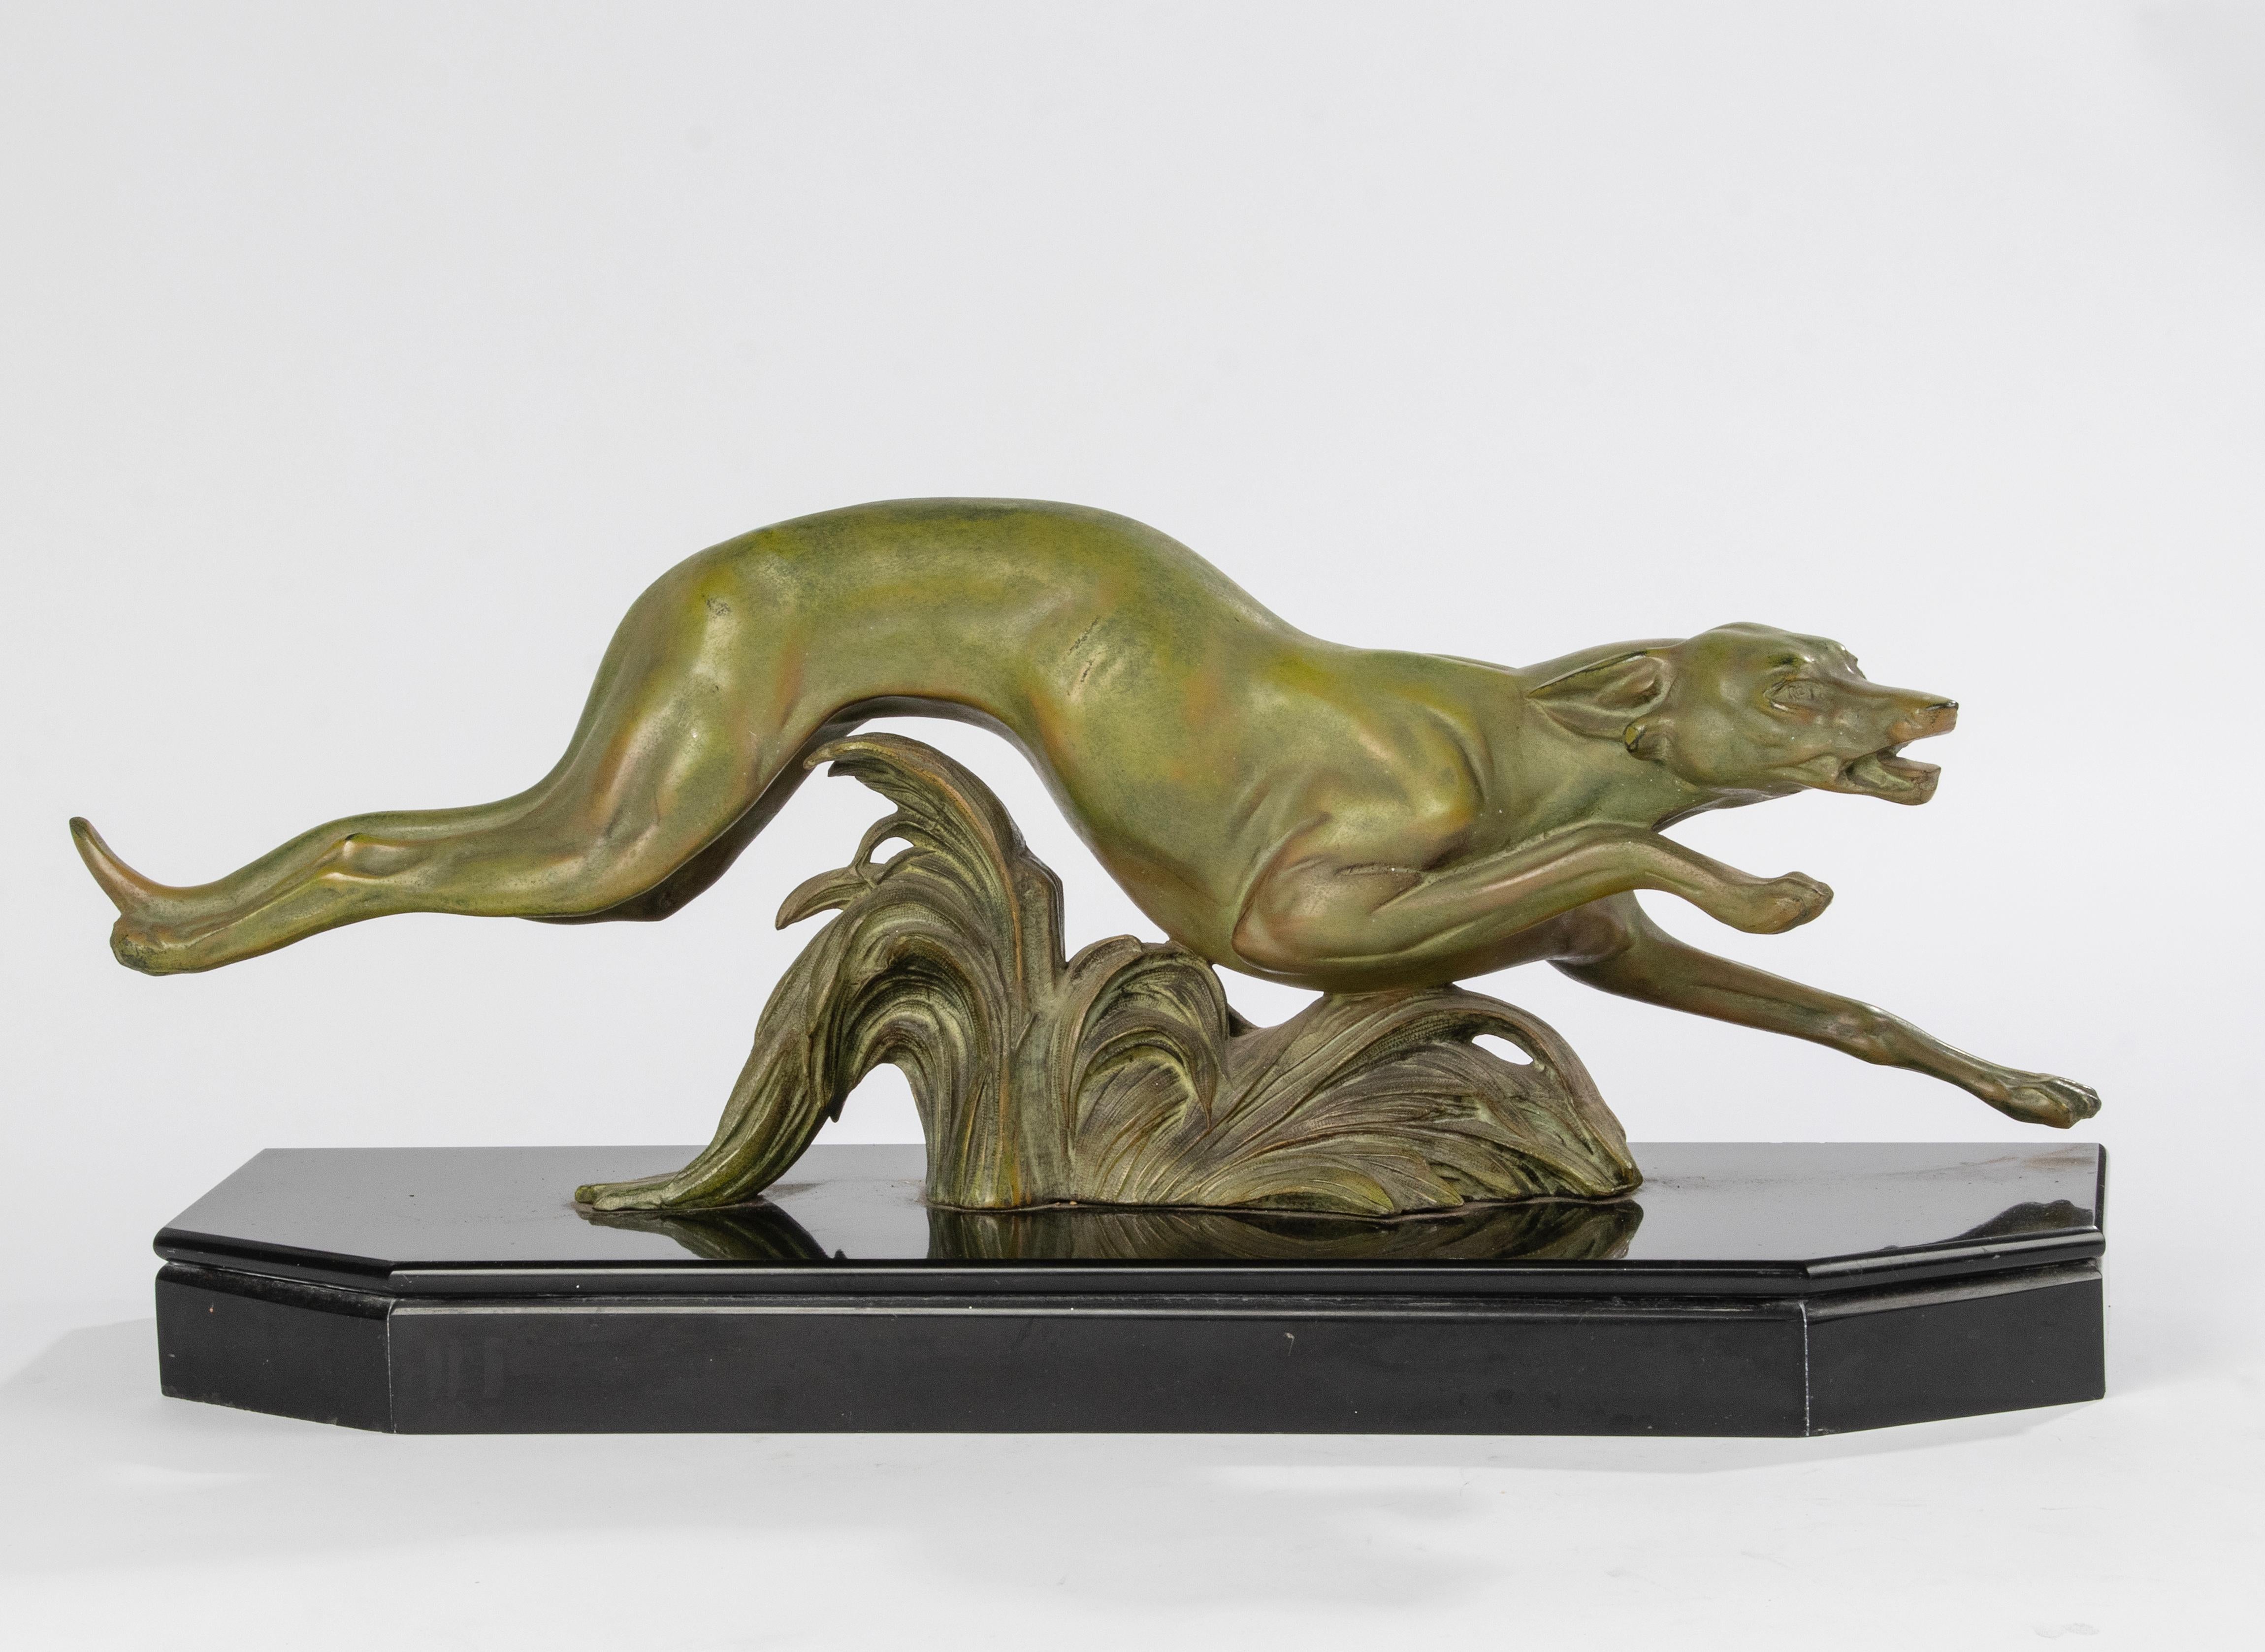 French Art Deco Period Patinated Spelter Sculpture Whippet / Greyhound Dog For Sale